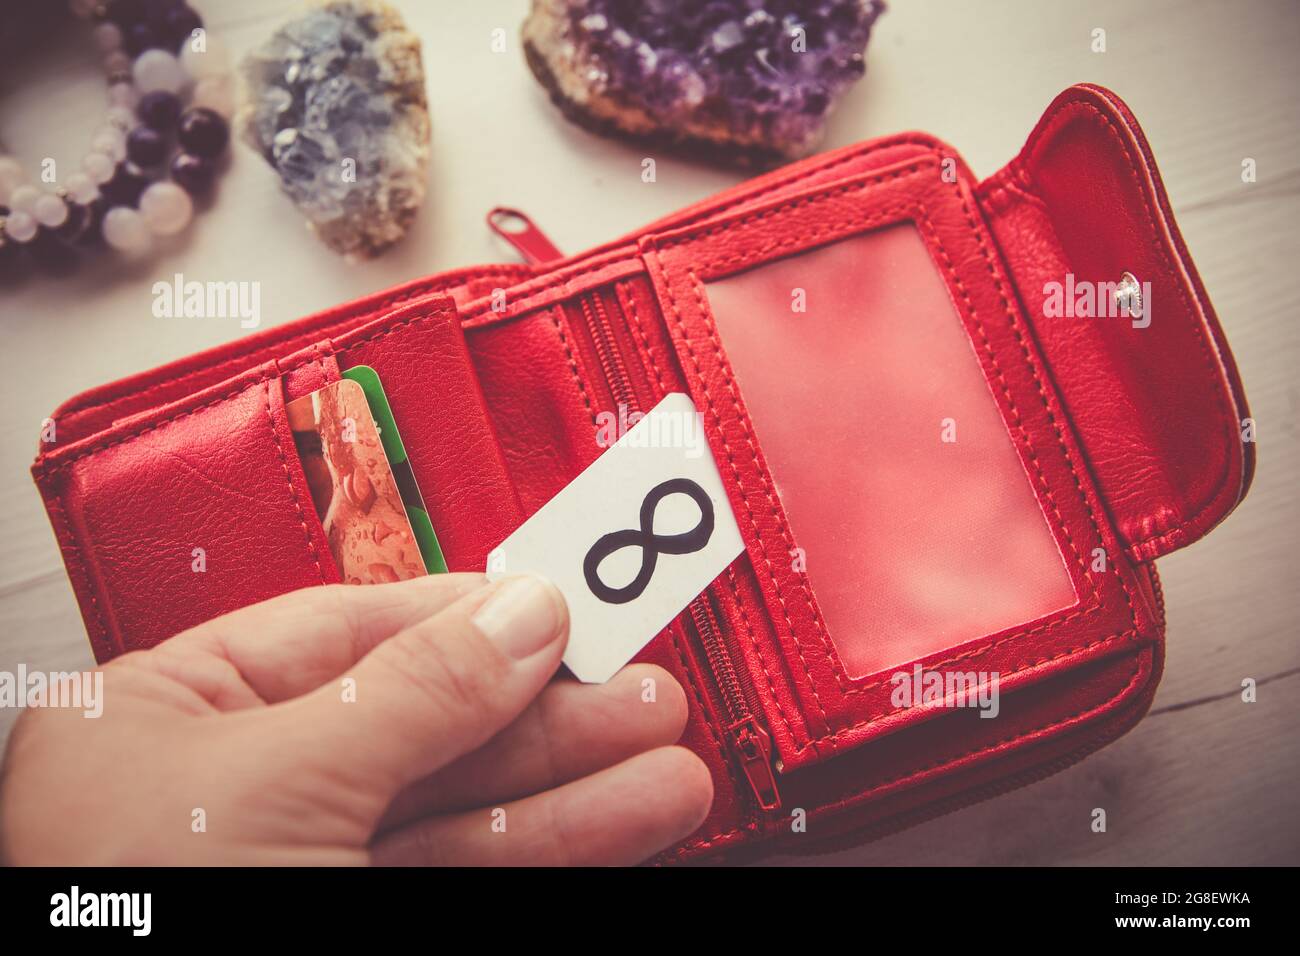 manifesting money concept close up view of woman person hand holding red wallet and symbol of infinity to attract more wealth and money 2G8EWKA